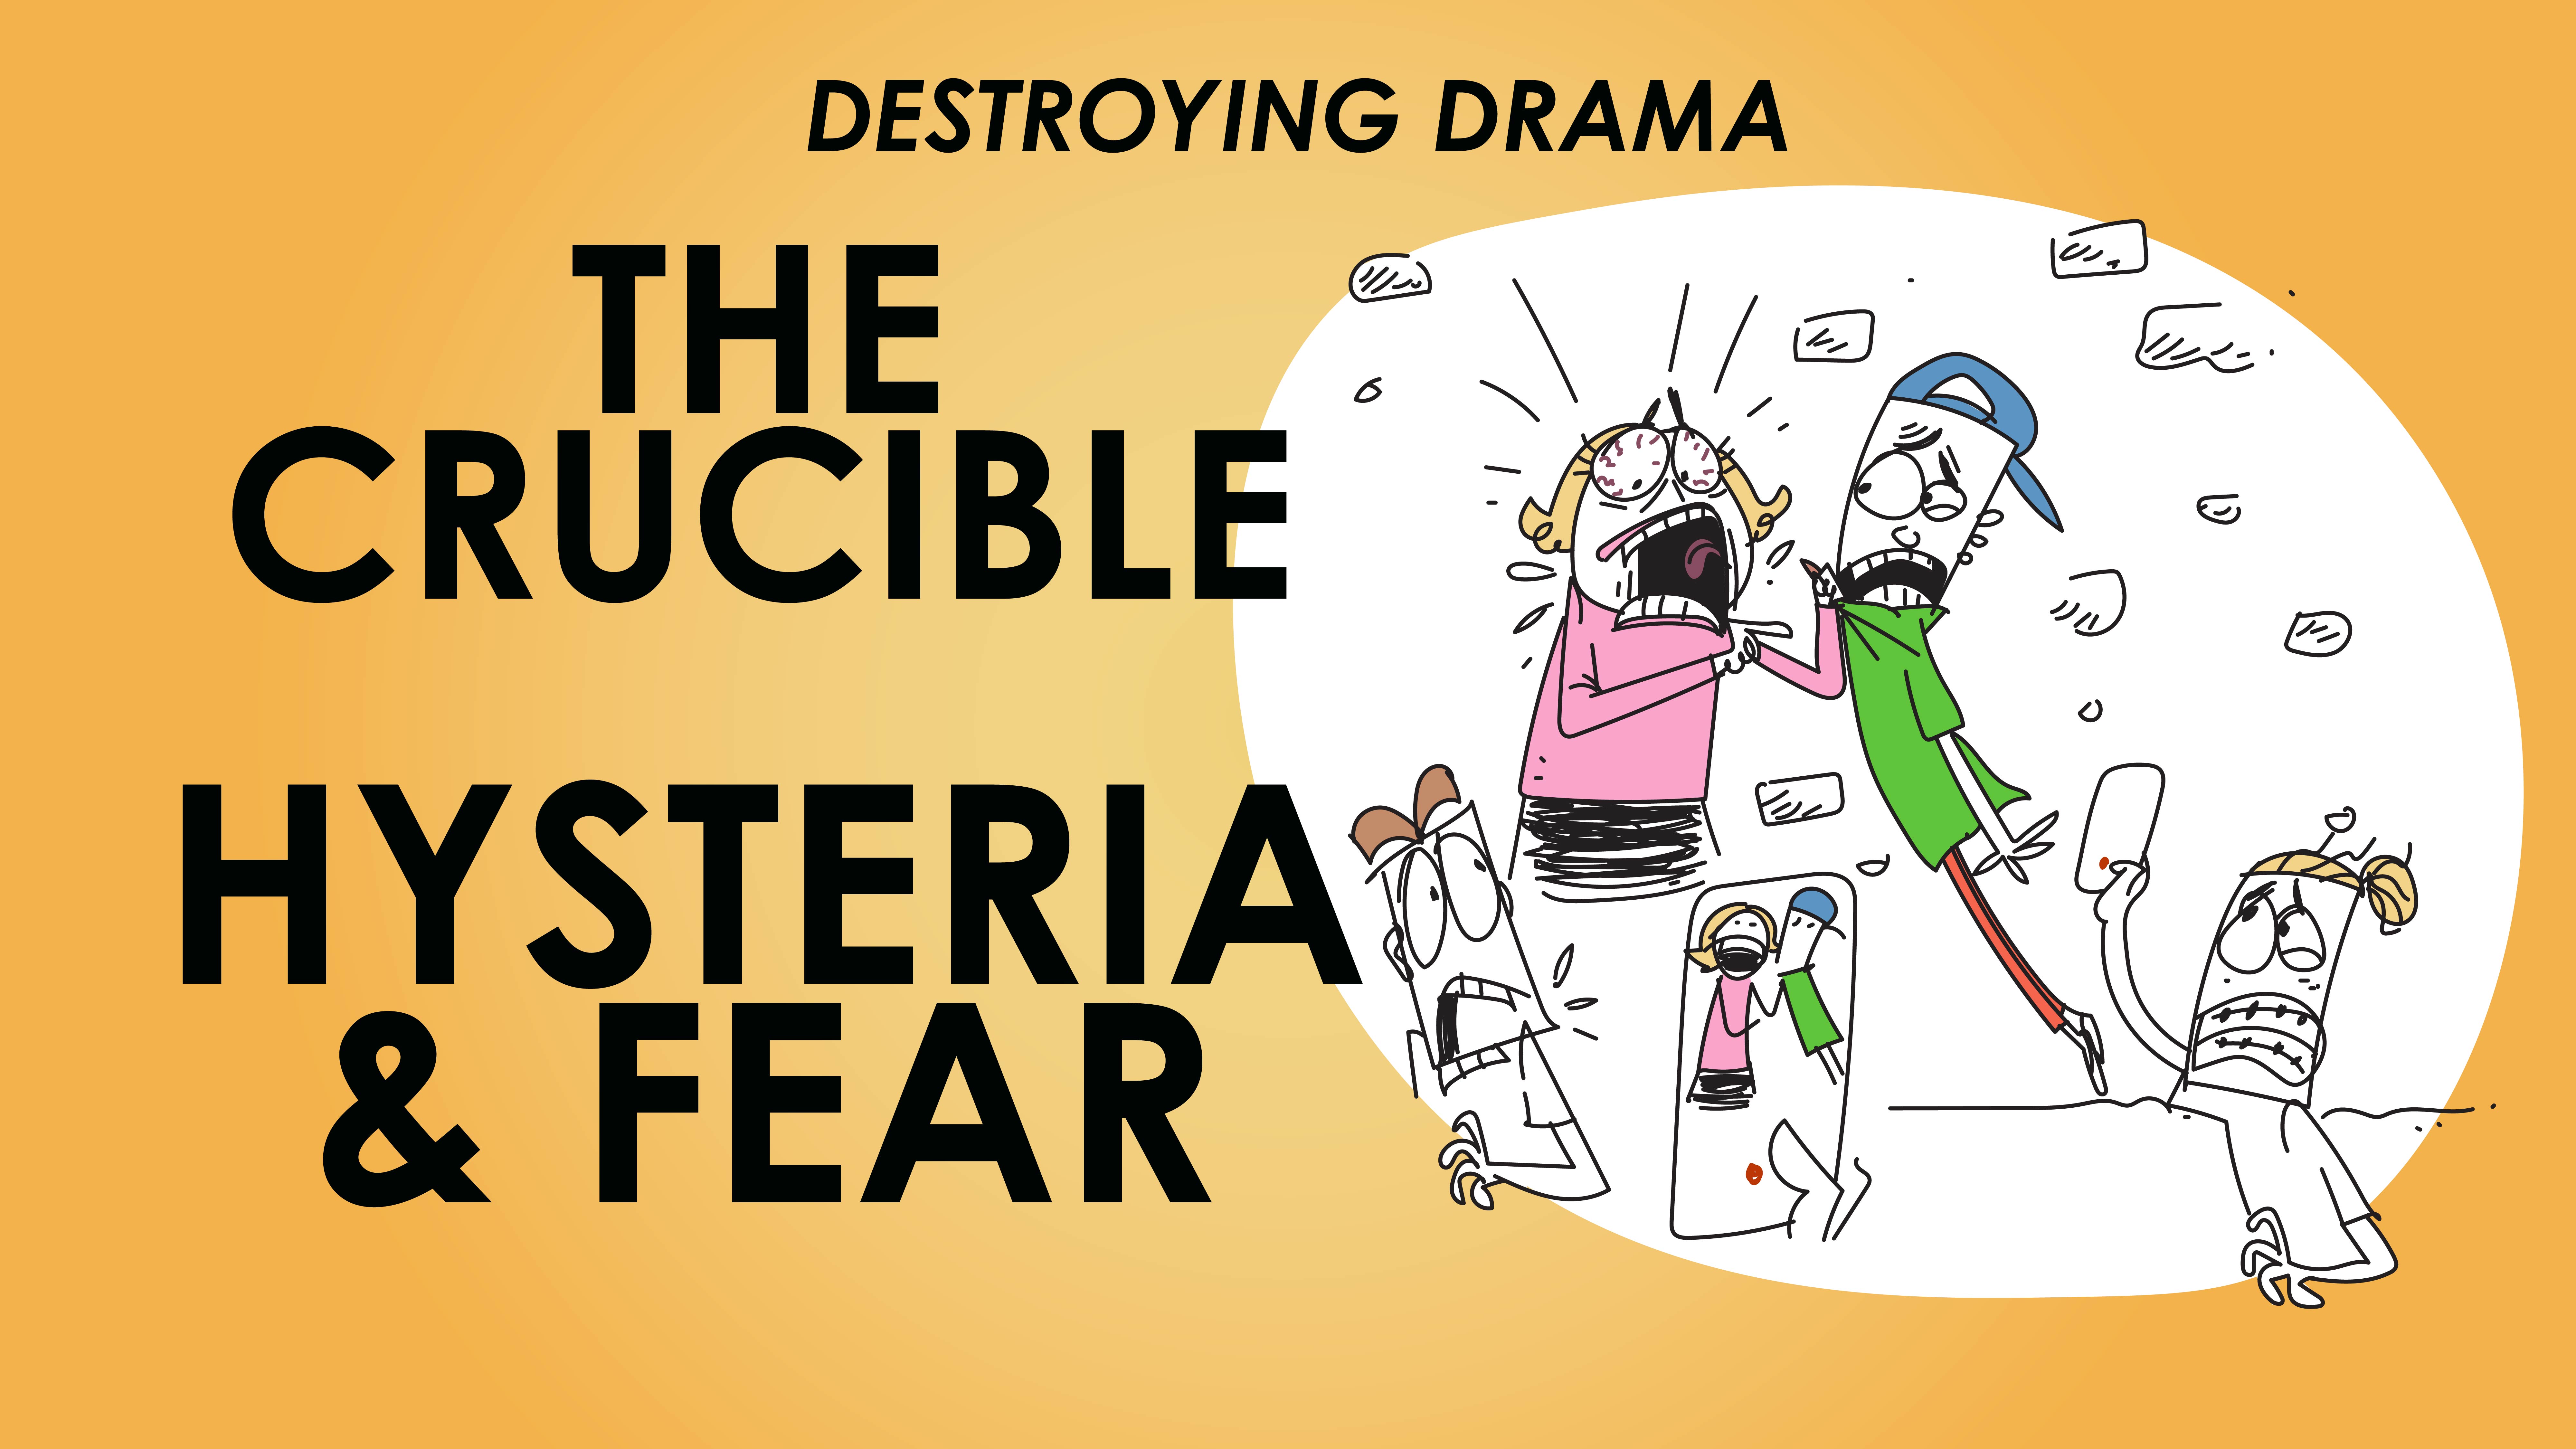 The Crucible - Arthur Miller - Theme of Hysteria and Fear - Destroying Drama Series 